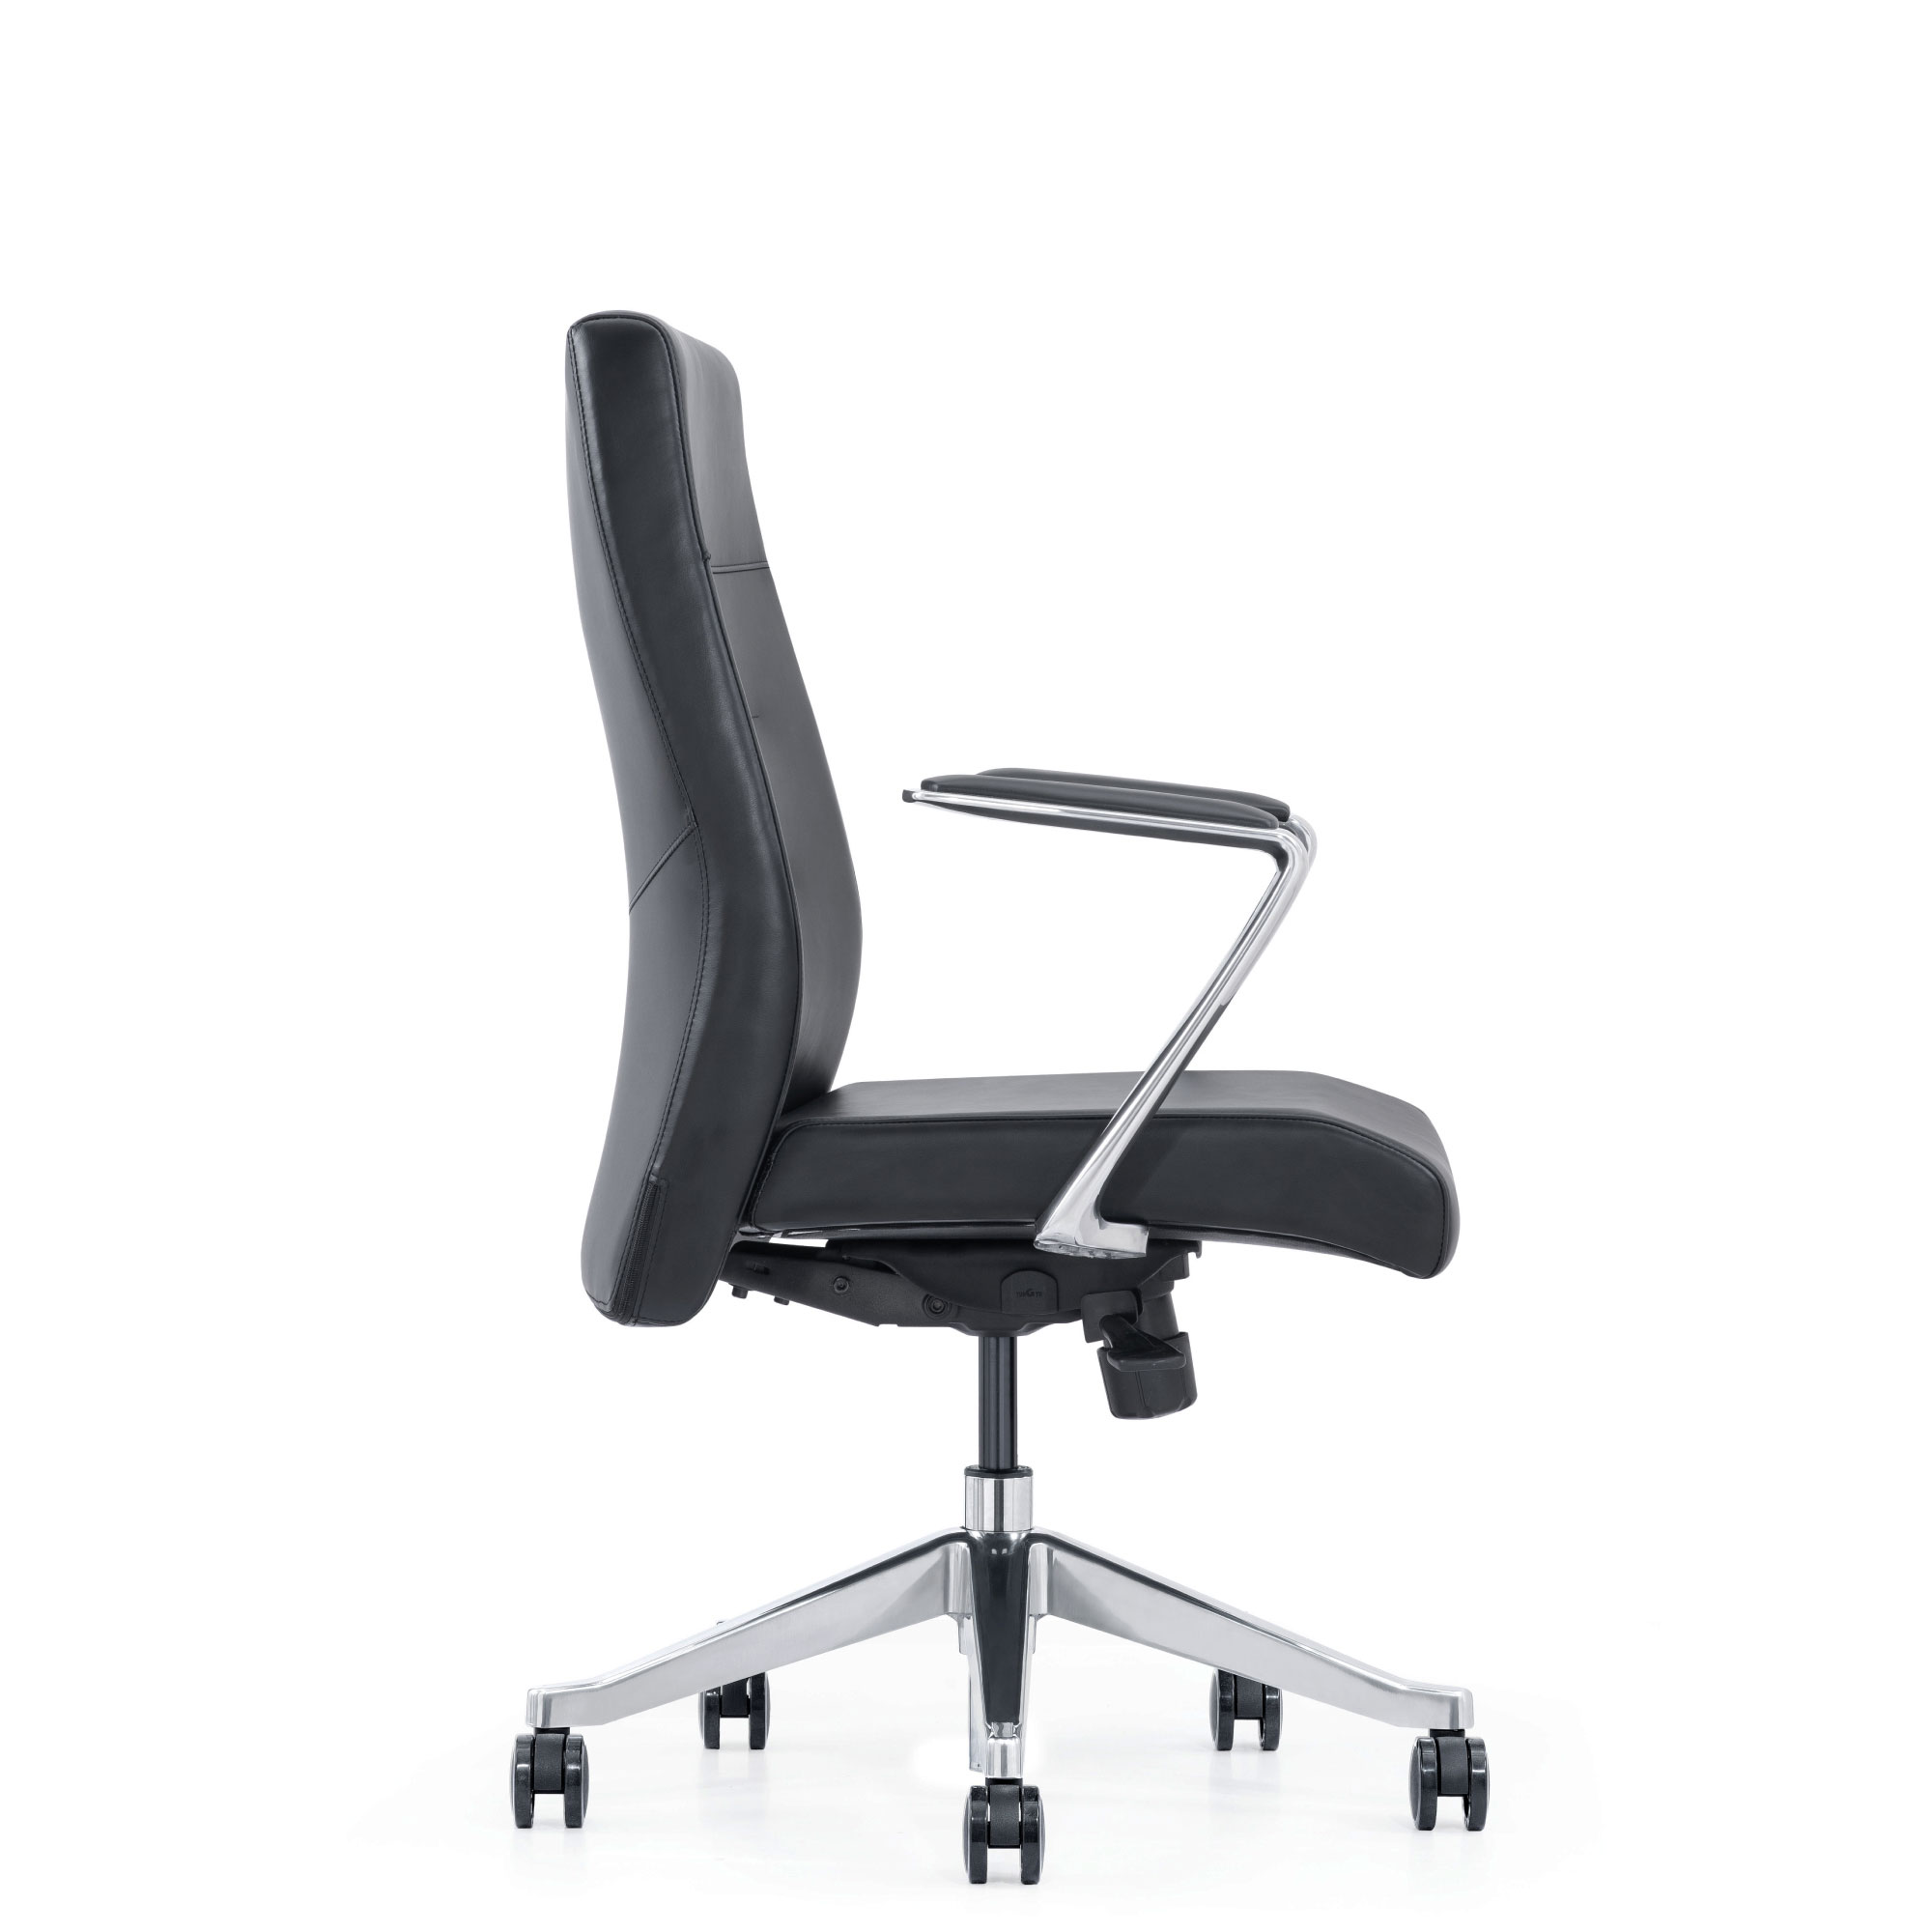 Black leather home office chair, side view